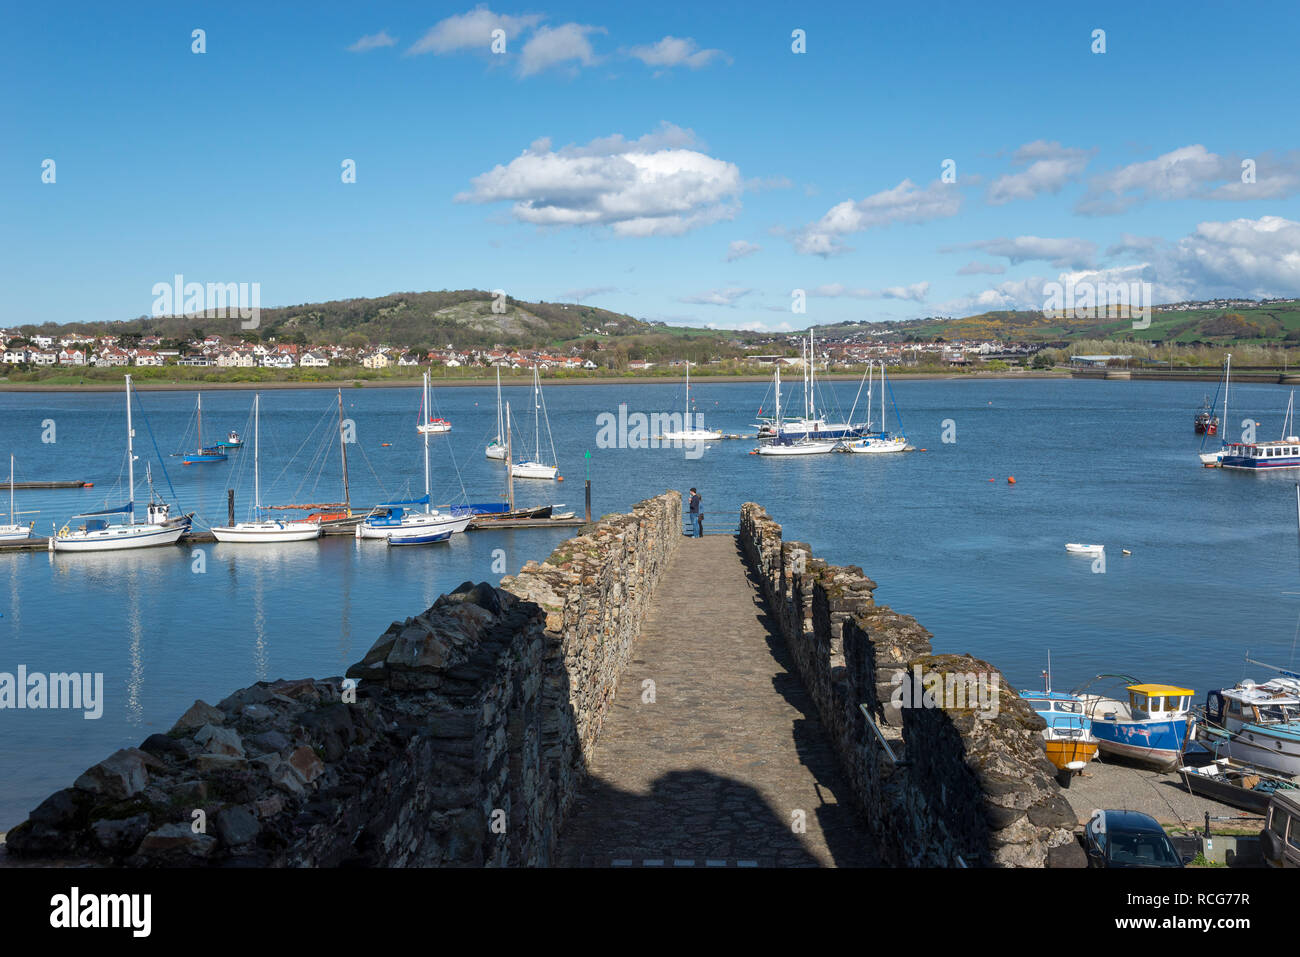 View of the river Conwy from the old town walls in North Wales. Deganwy on the opposite side. Stock Photo